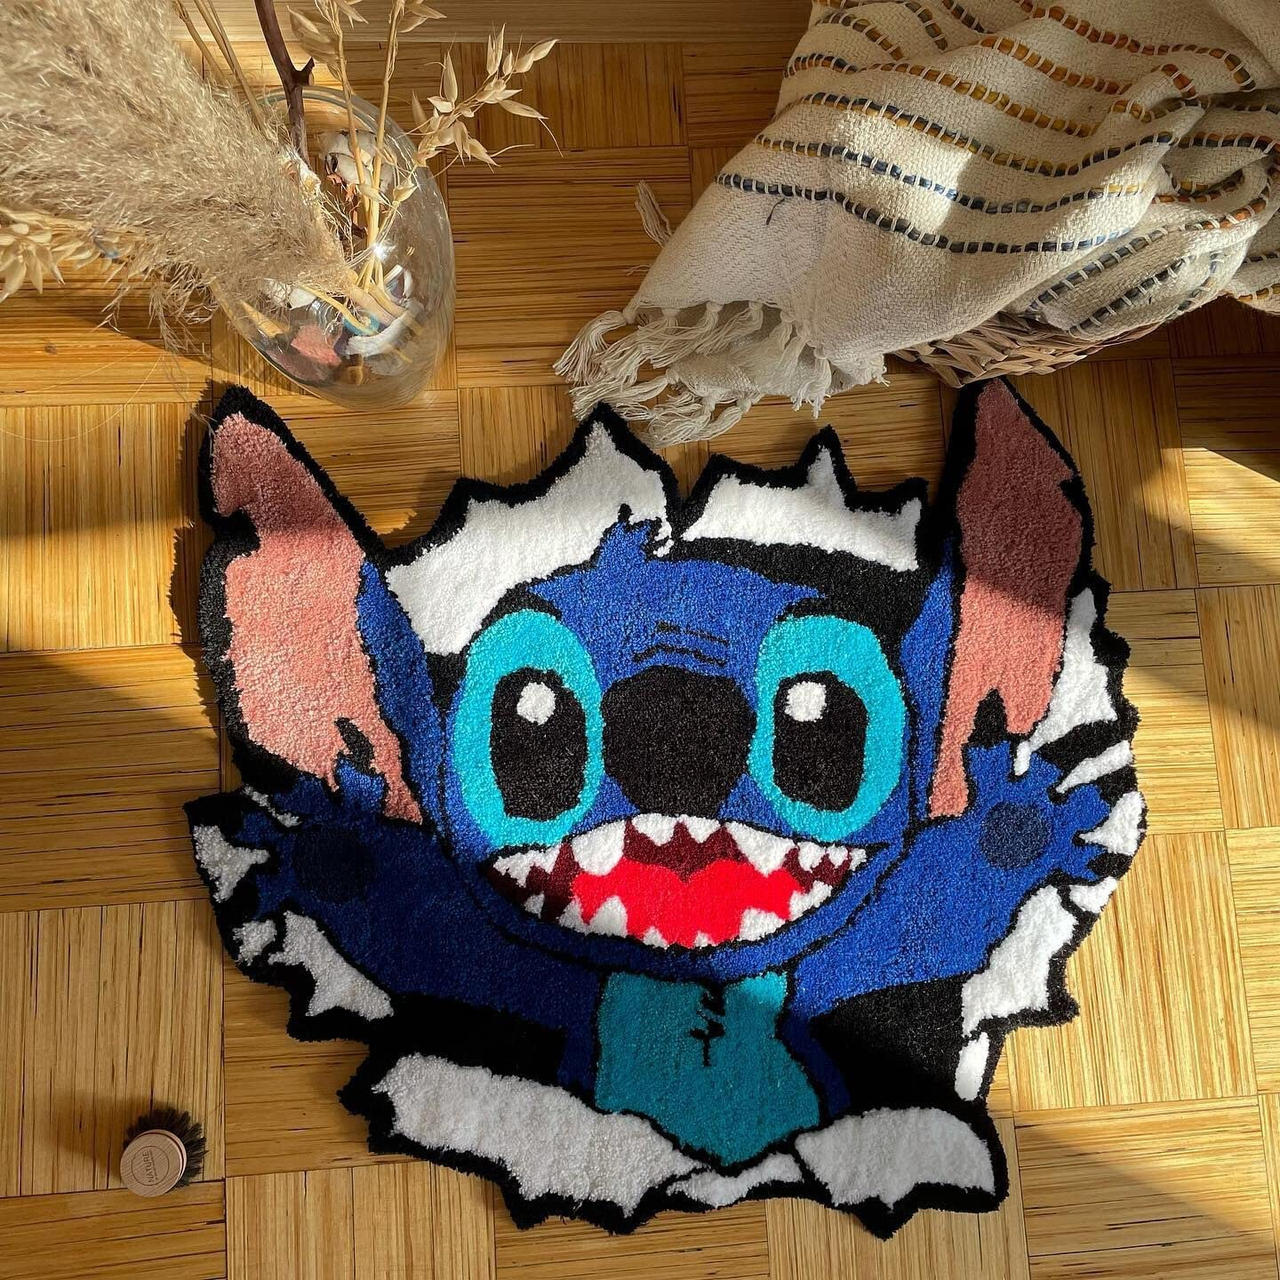 Stitch Rug Tufted from mypaintedshoes by ajdv on DeviantArt